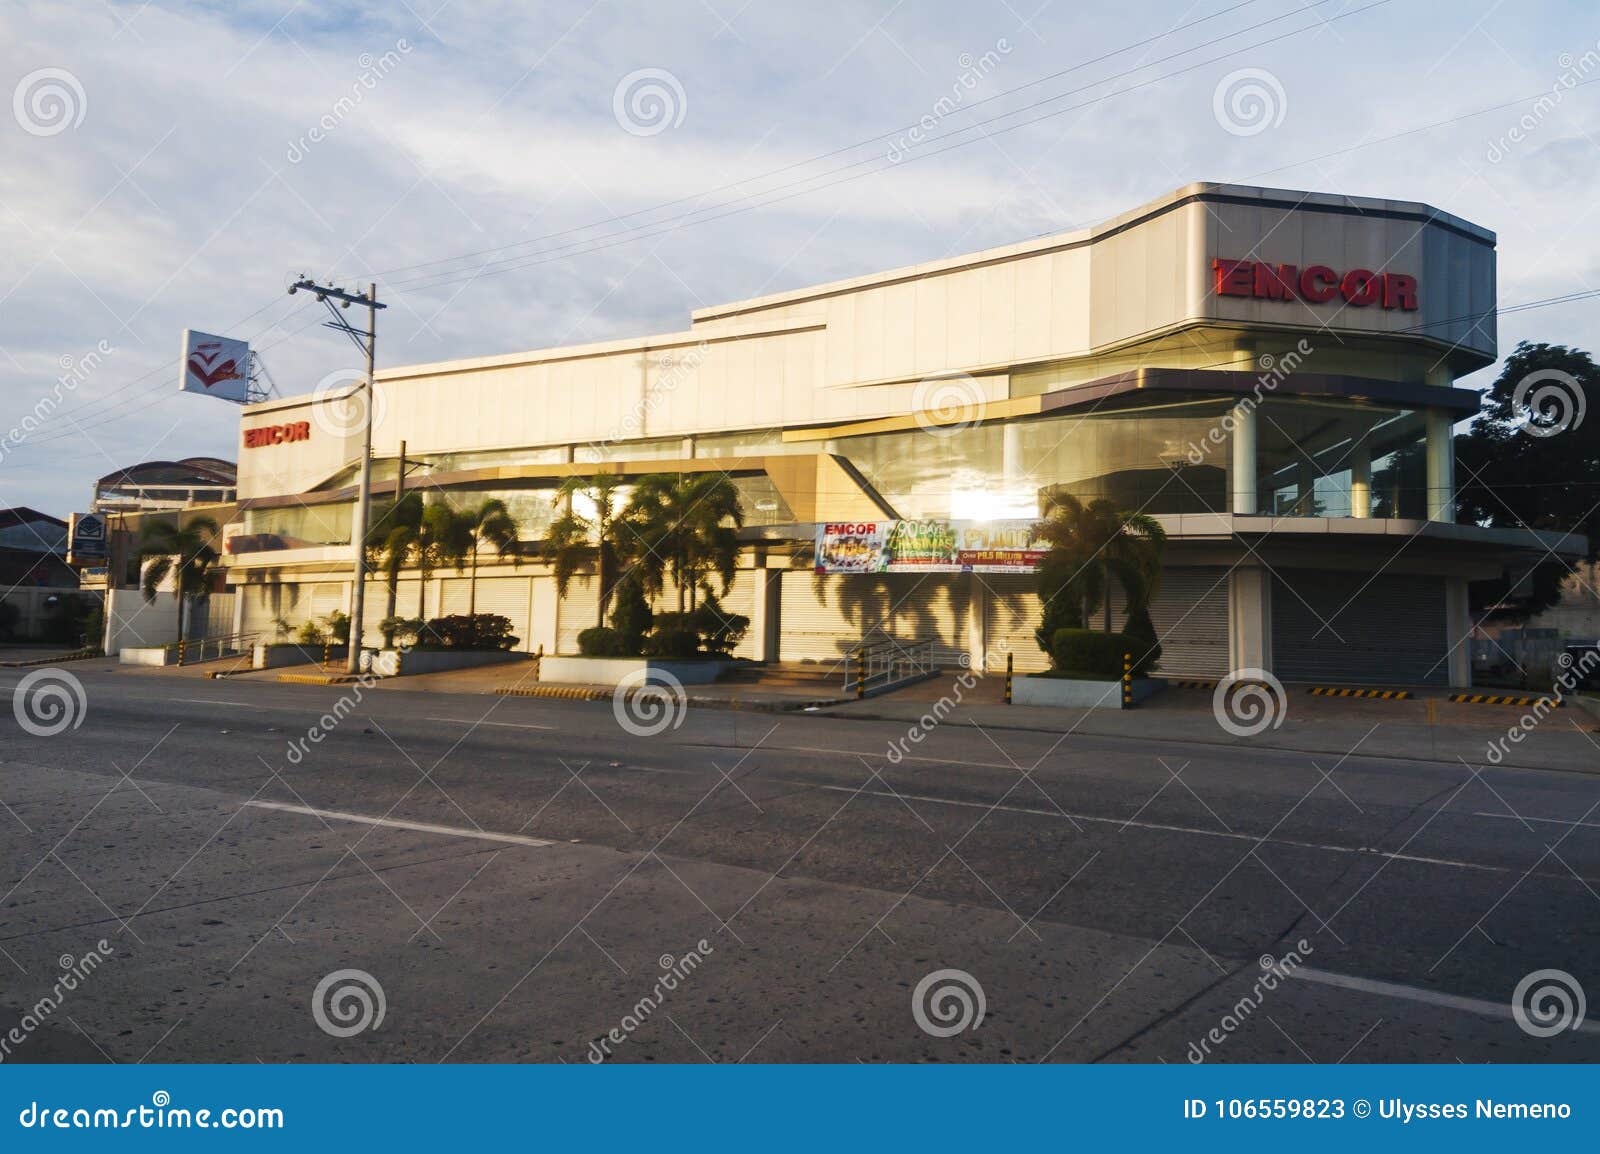 Emcor branch along Cabaguio Avenue in Davao, Philippines - Emcor is on of the leading appliance and motorcycle dealers of the City.